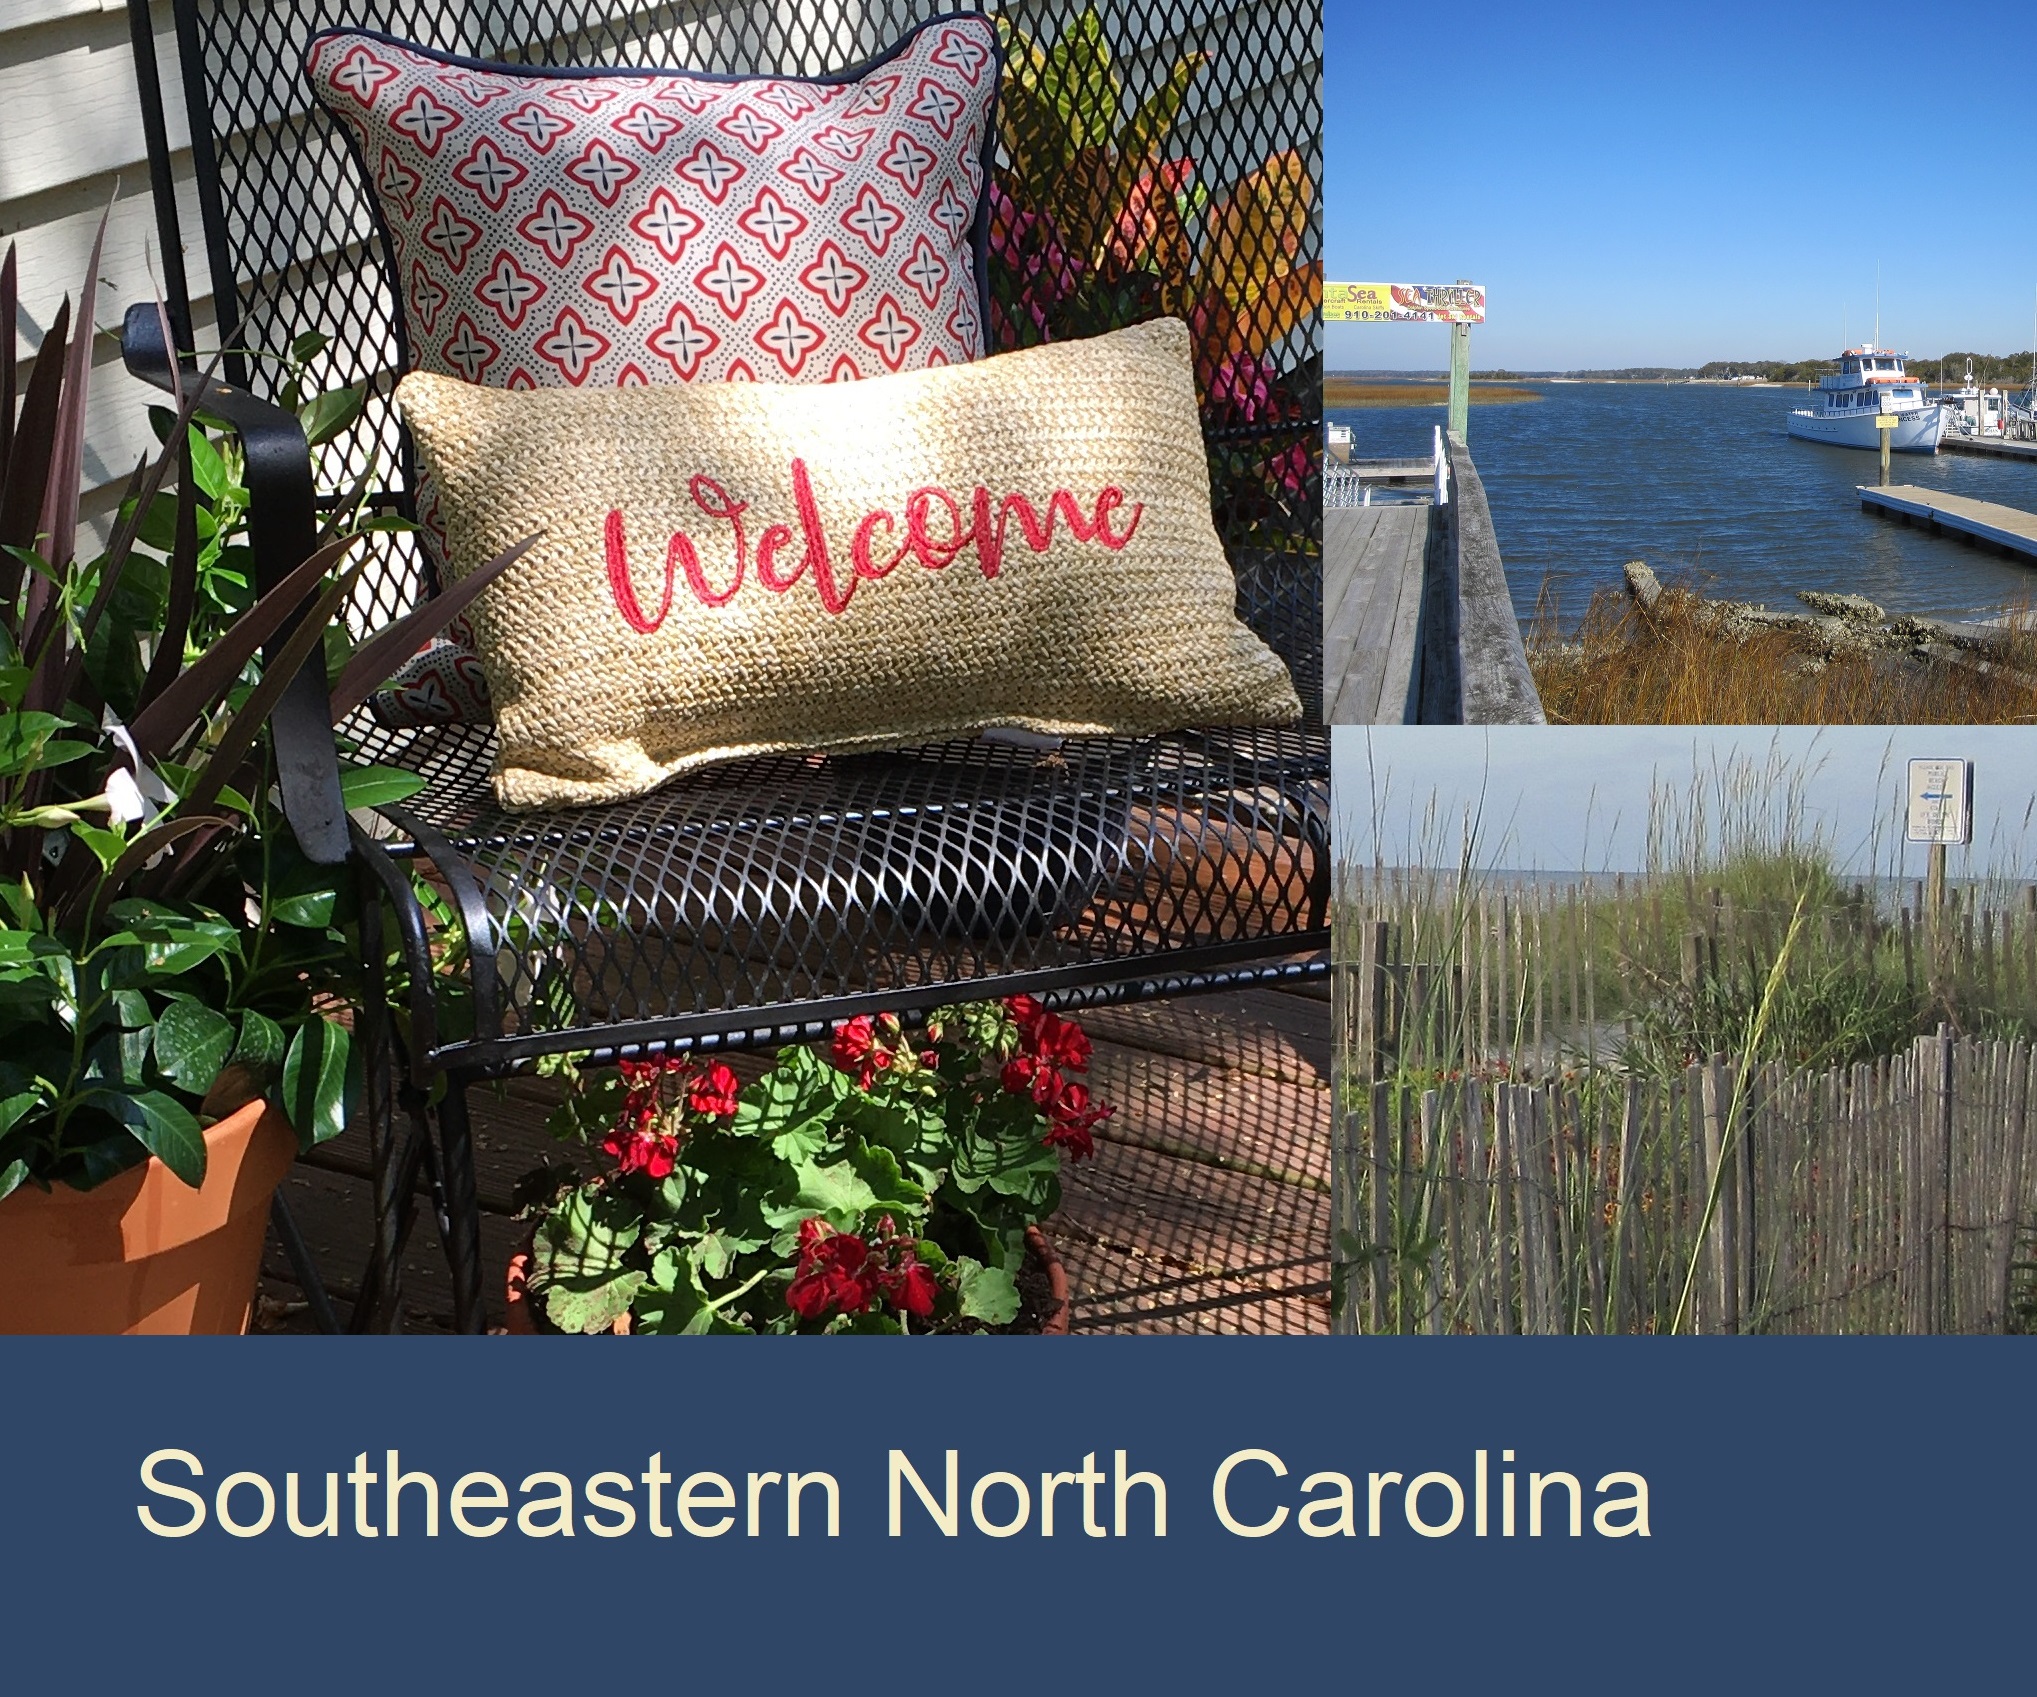 Southeastern NC towns and communities